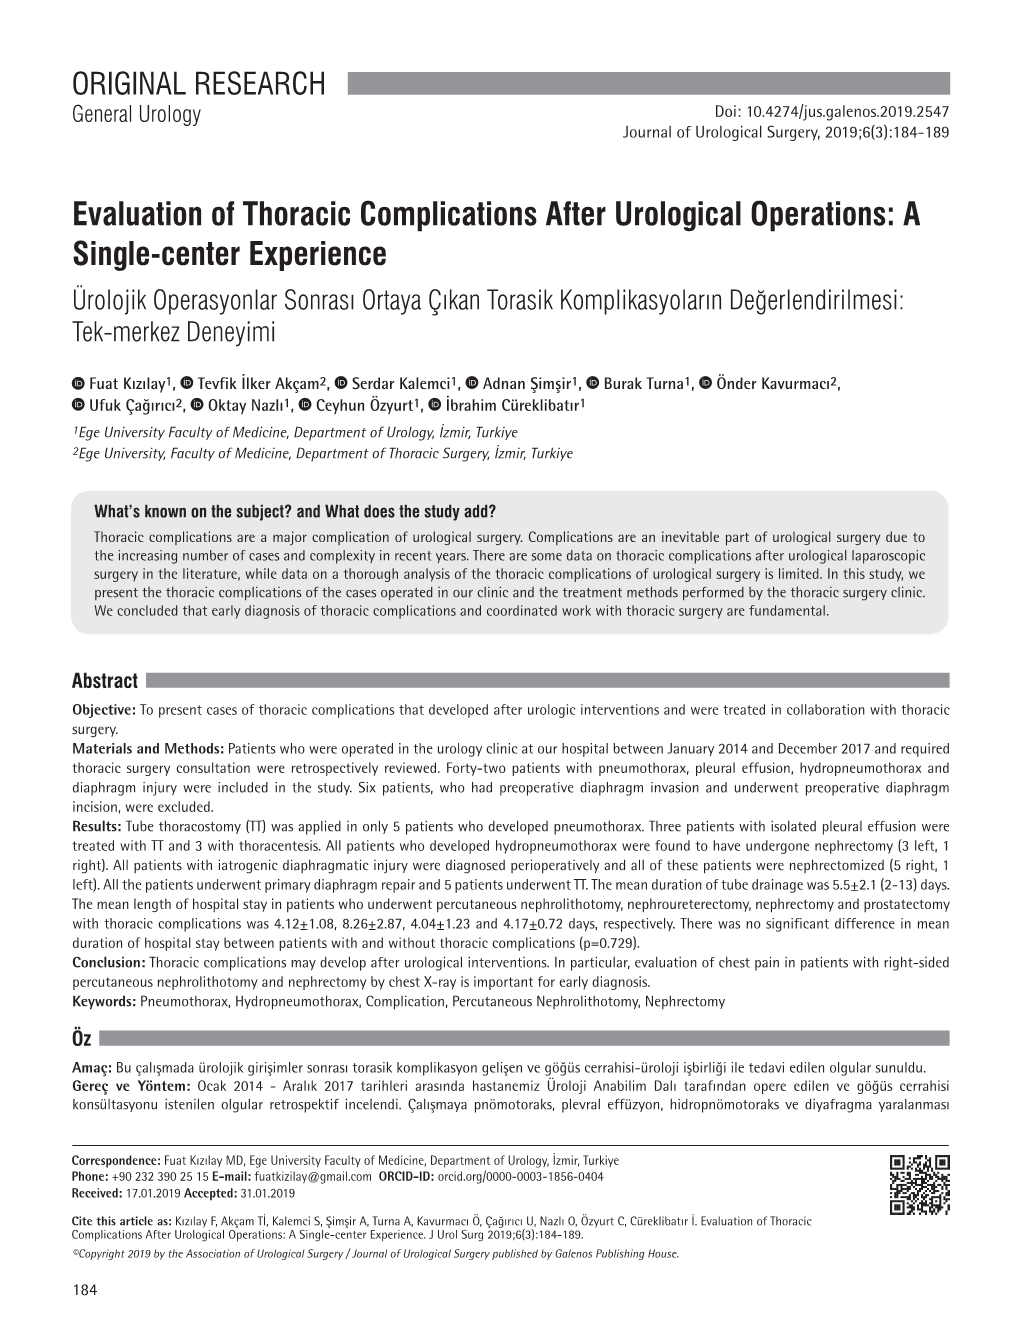 Evaluation of Thoracic Complications After Urological Operations: A